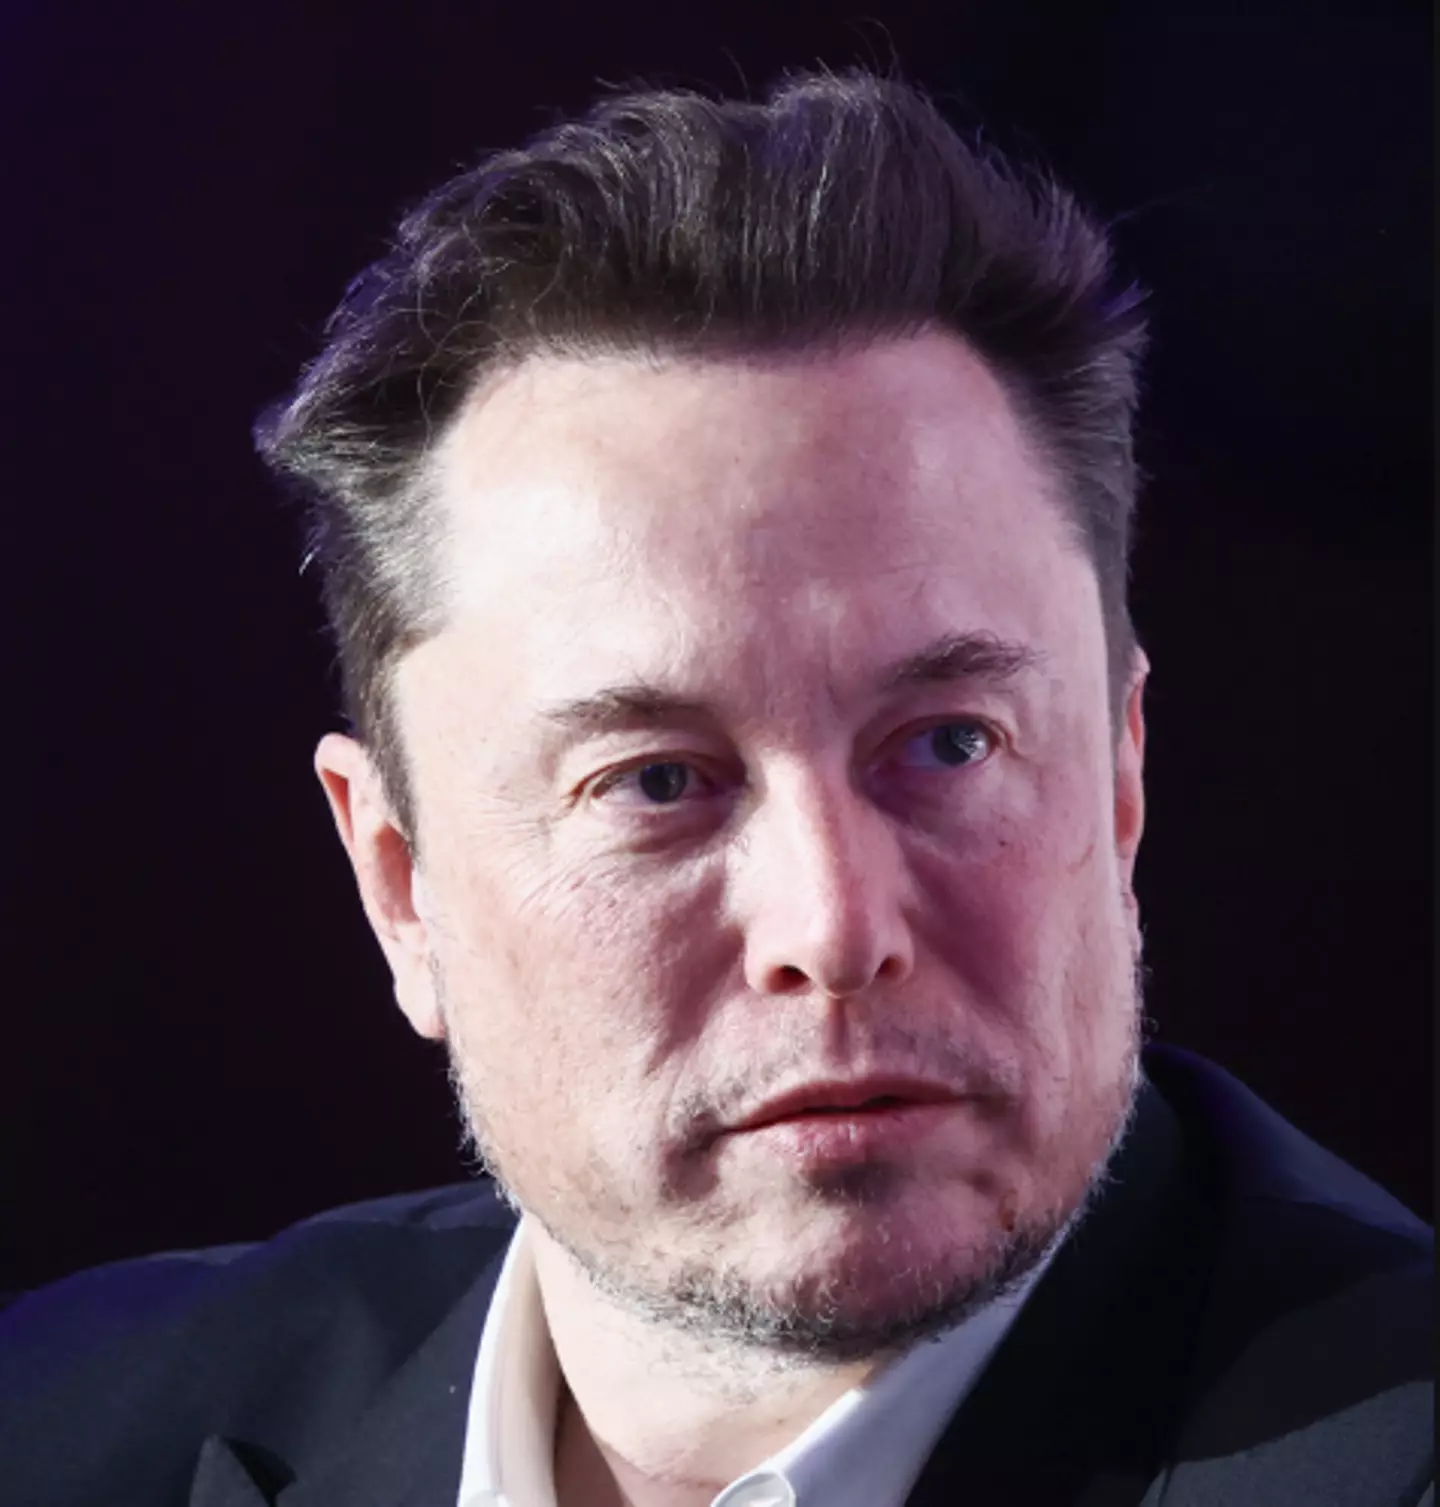 Tech titan Elon Musk has doubled-down on his prediction for when artificial intelligence will become smarter than humans.